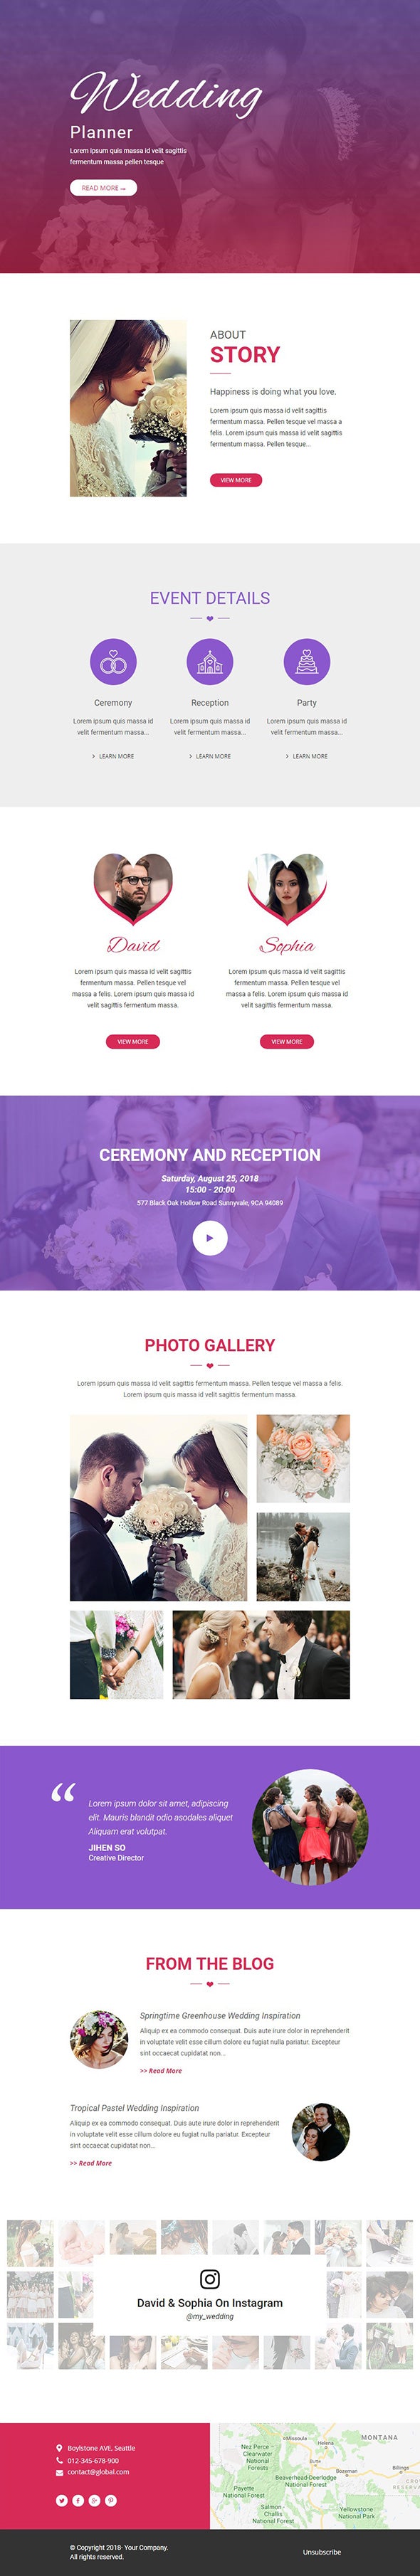 Free Wedding Planner Email Template